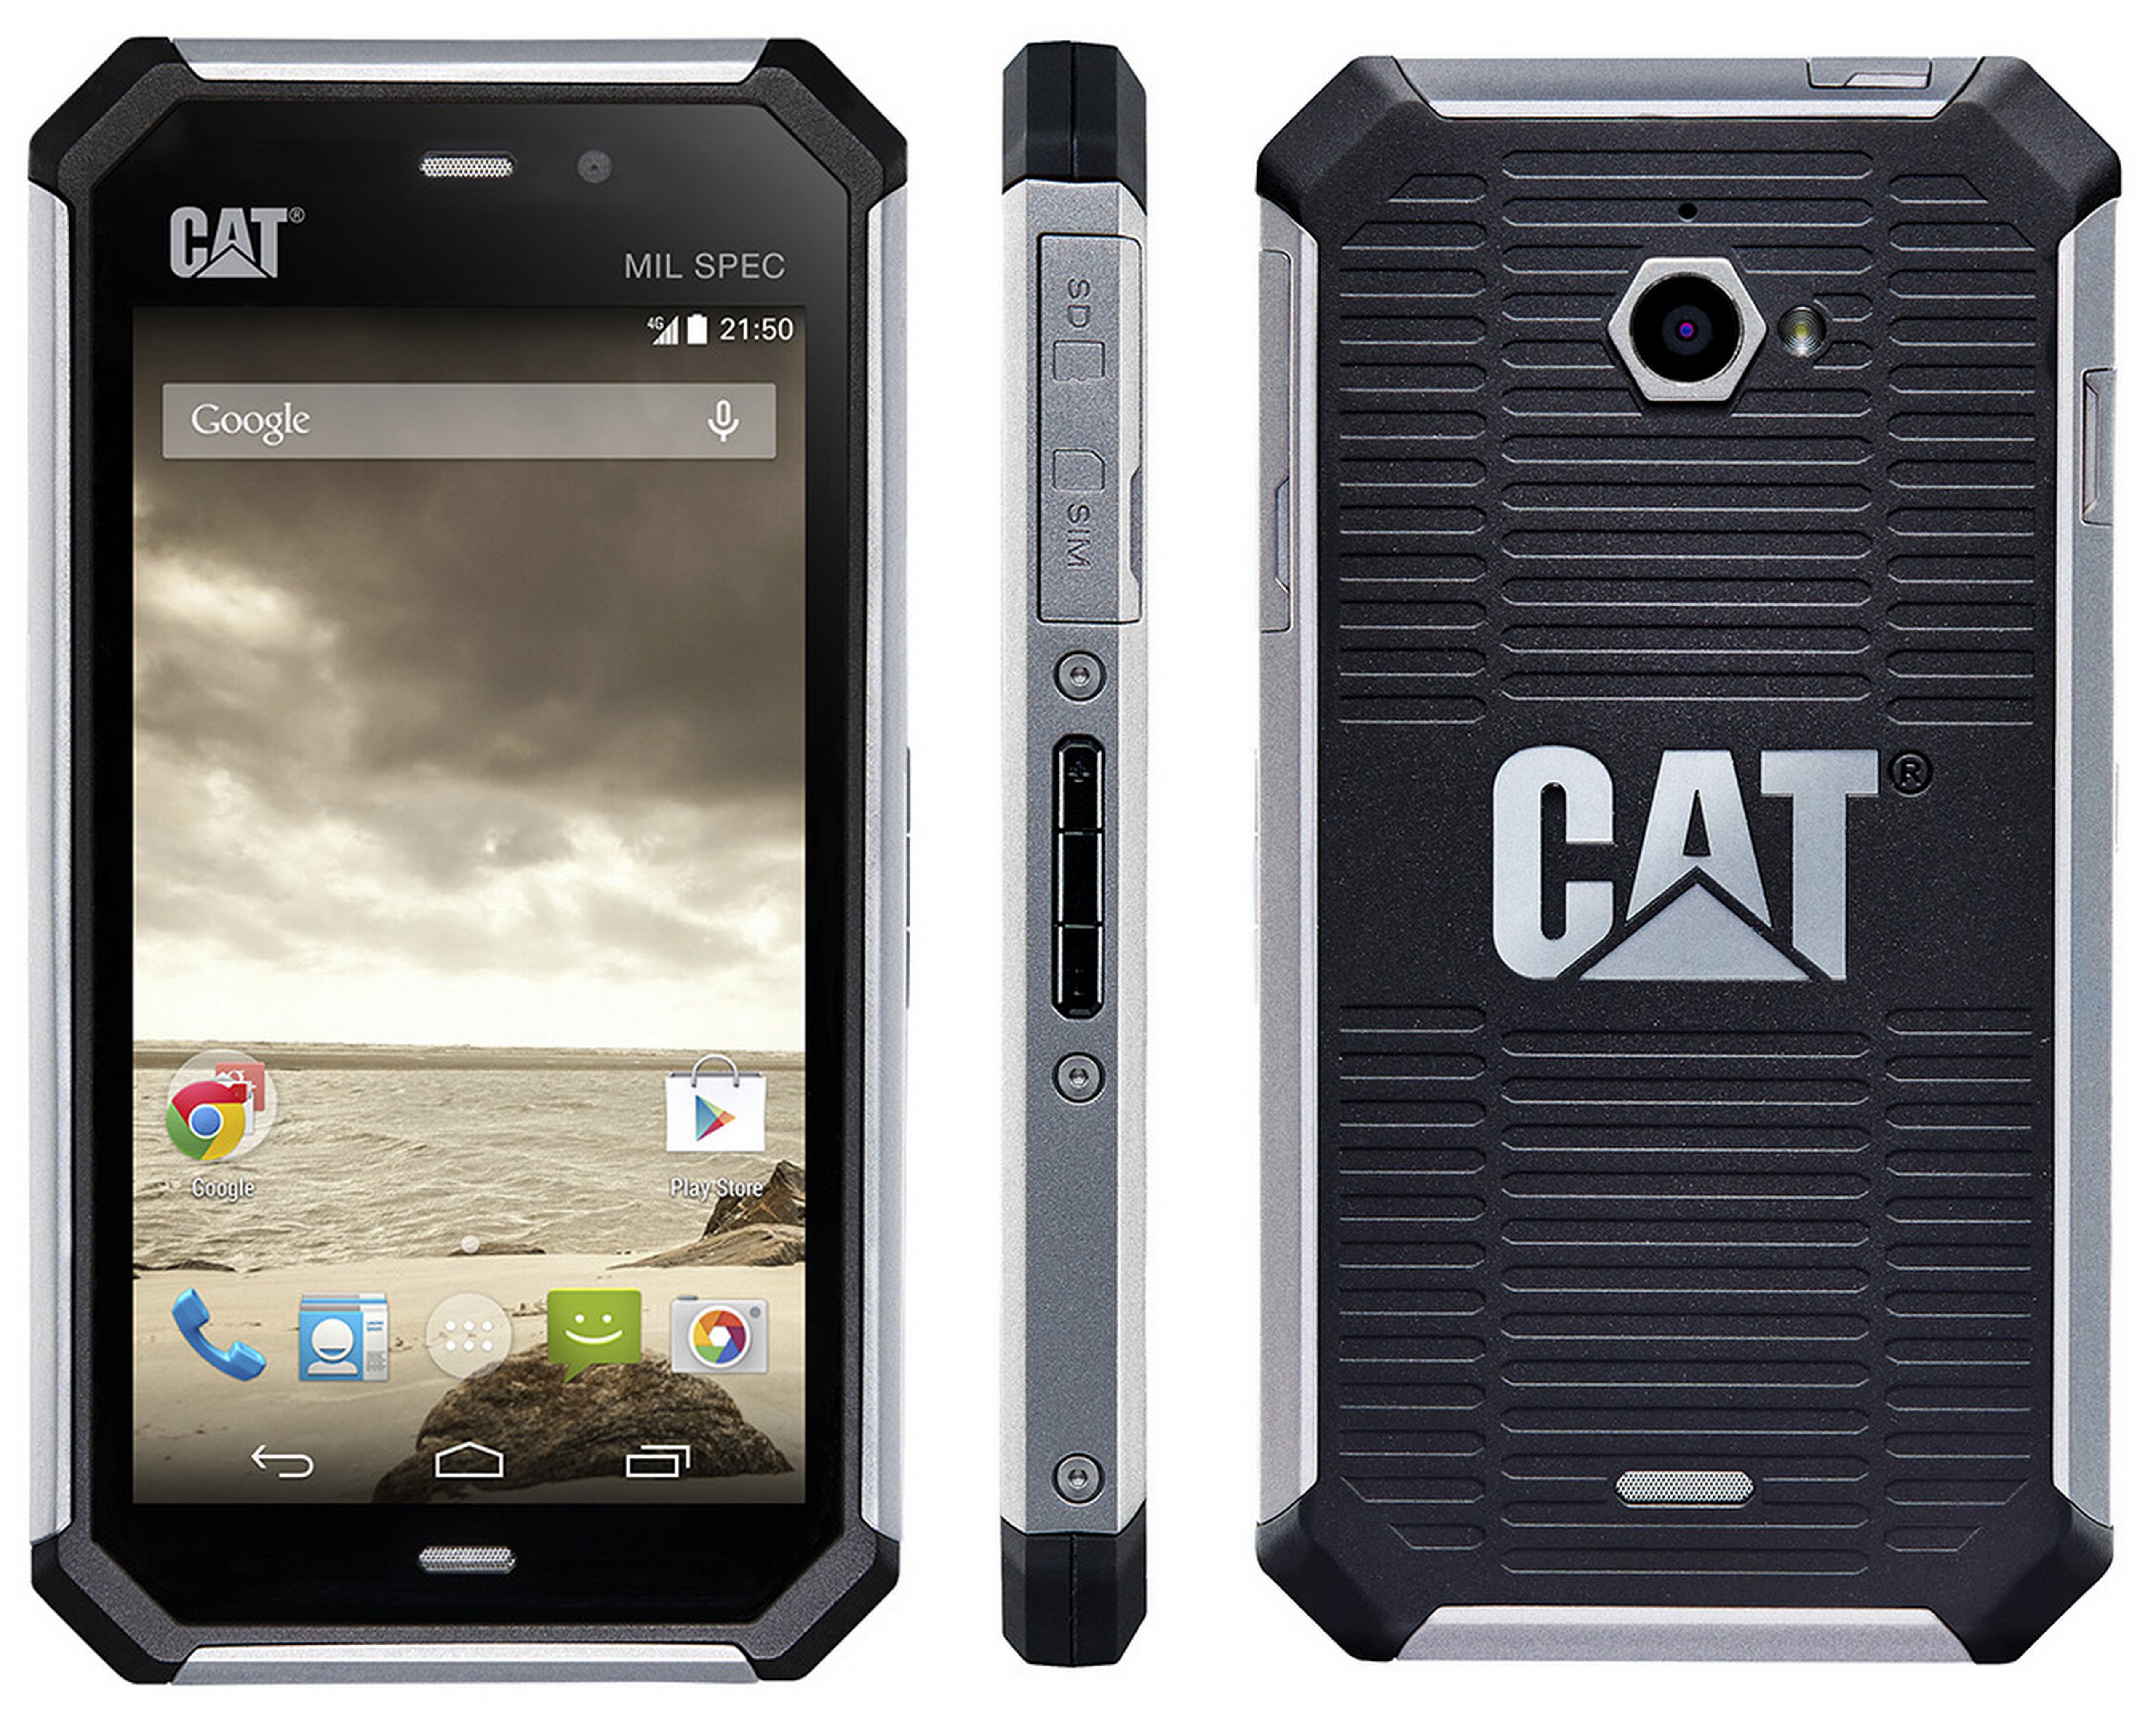 Cat S50 smartphone review 